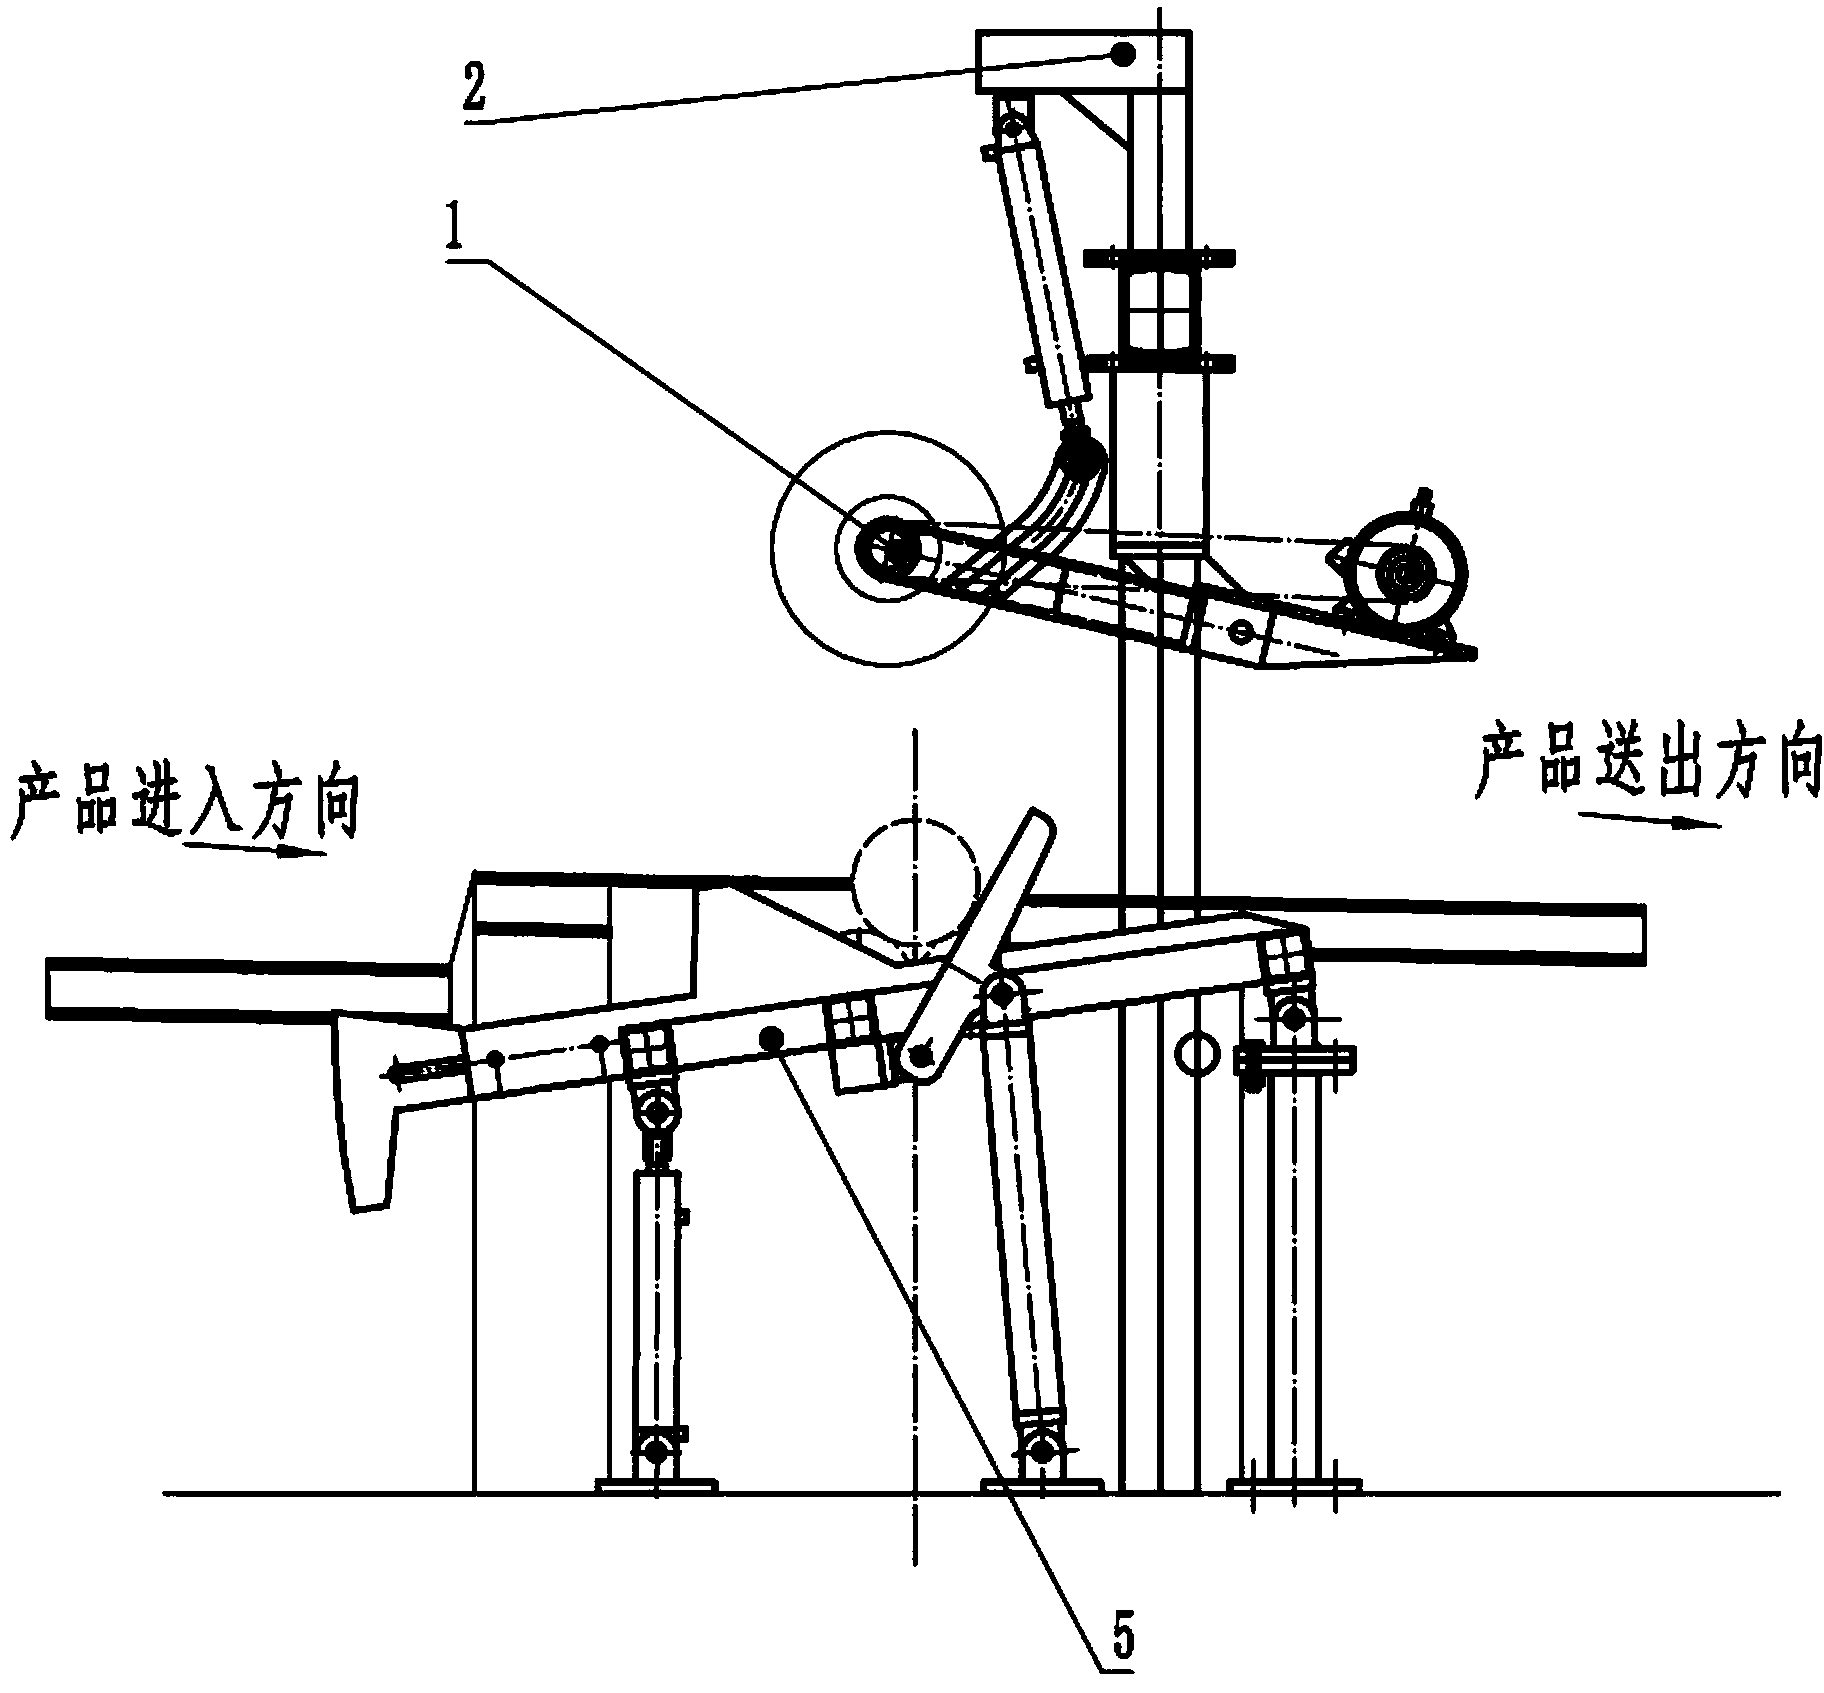 Fixed-length cutting system